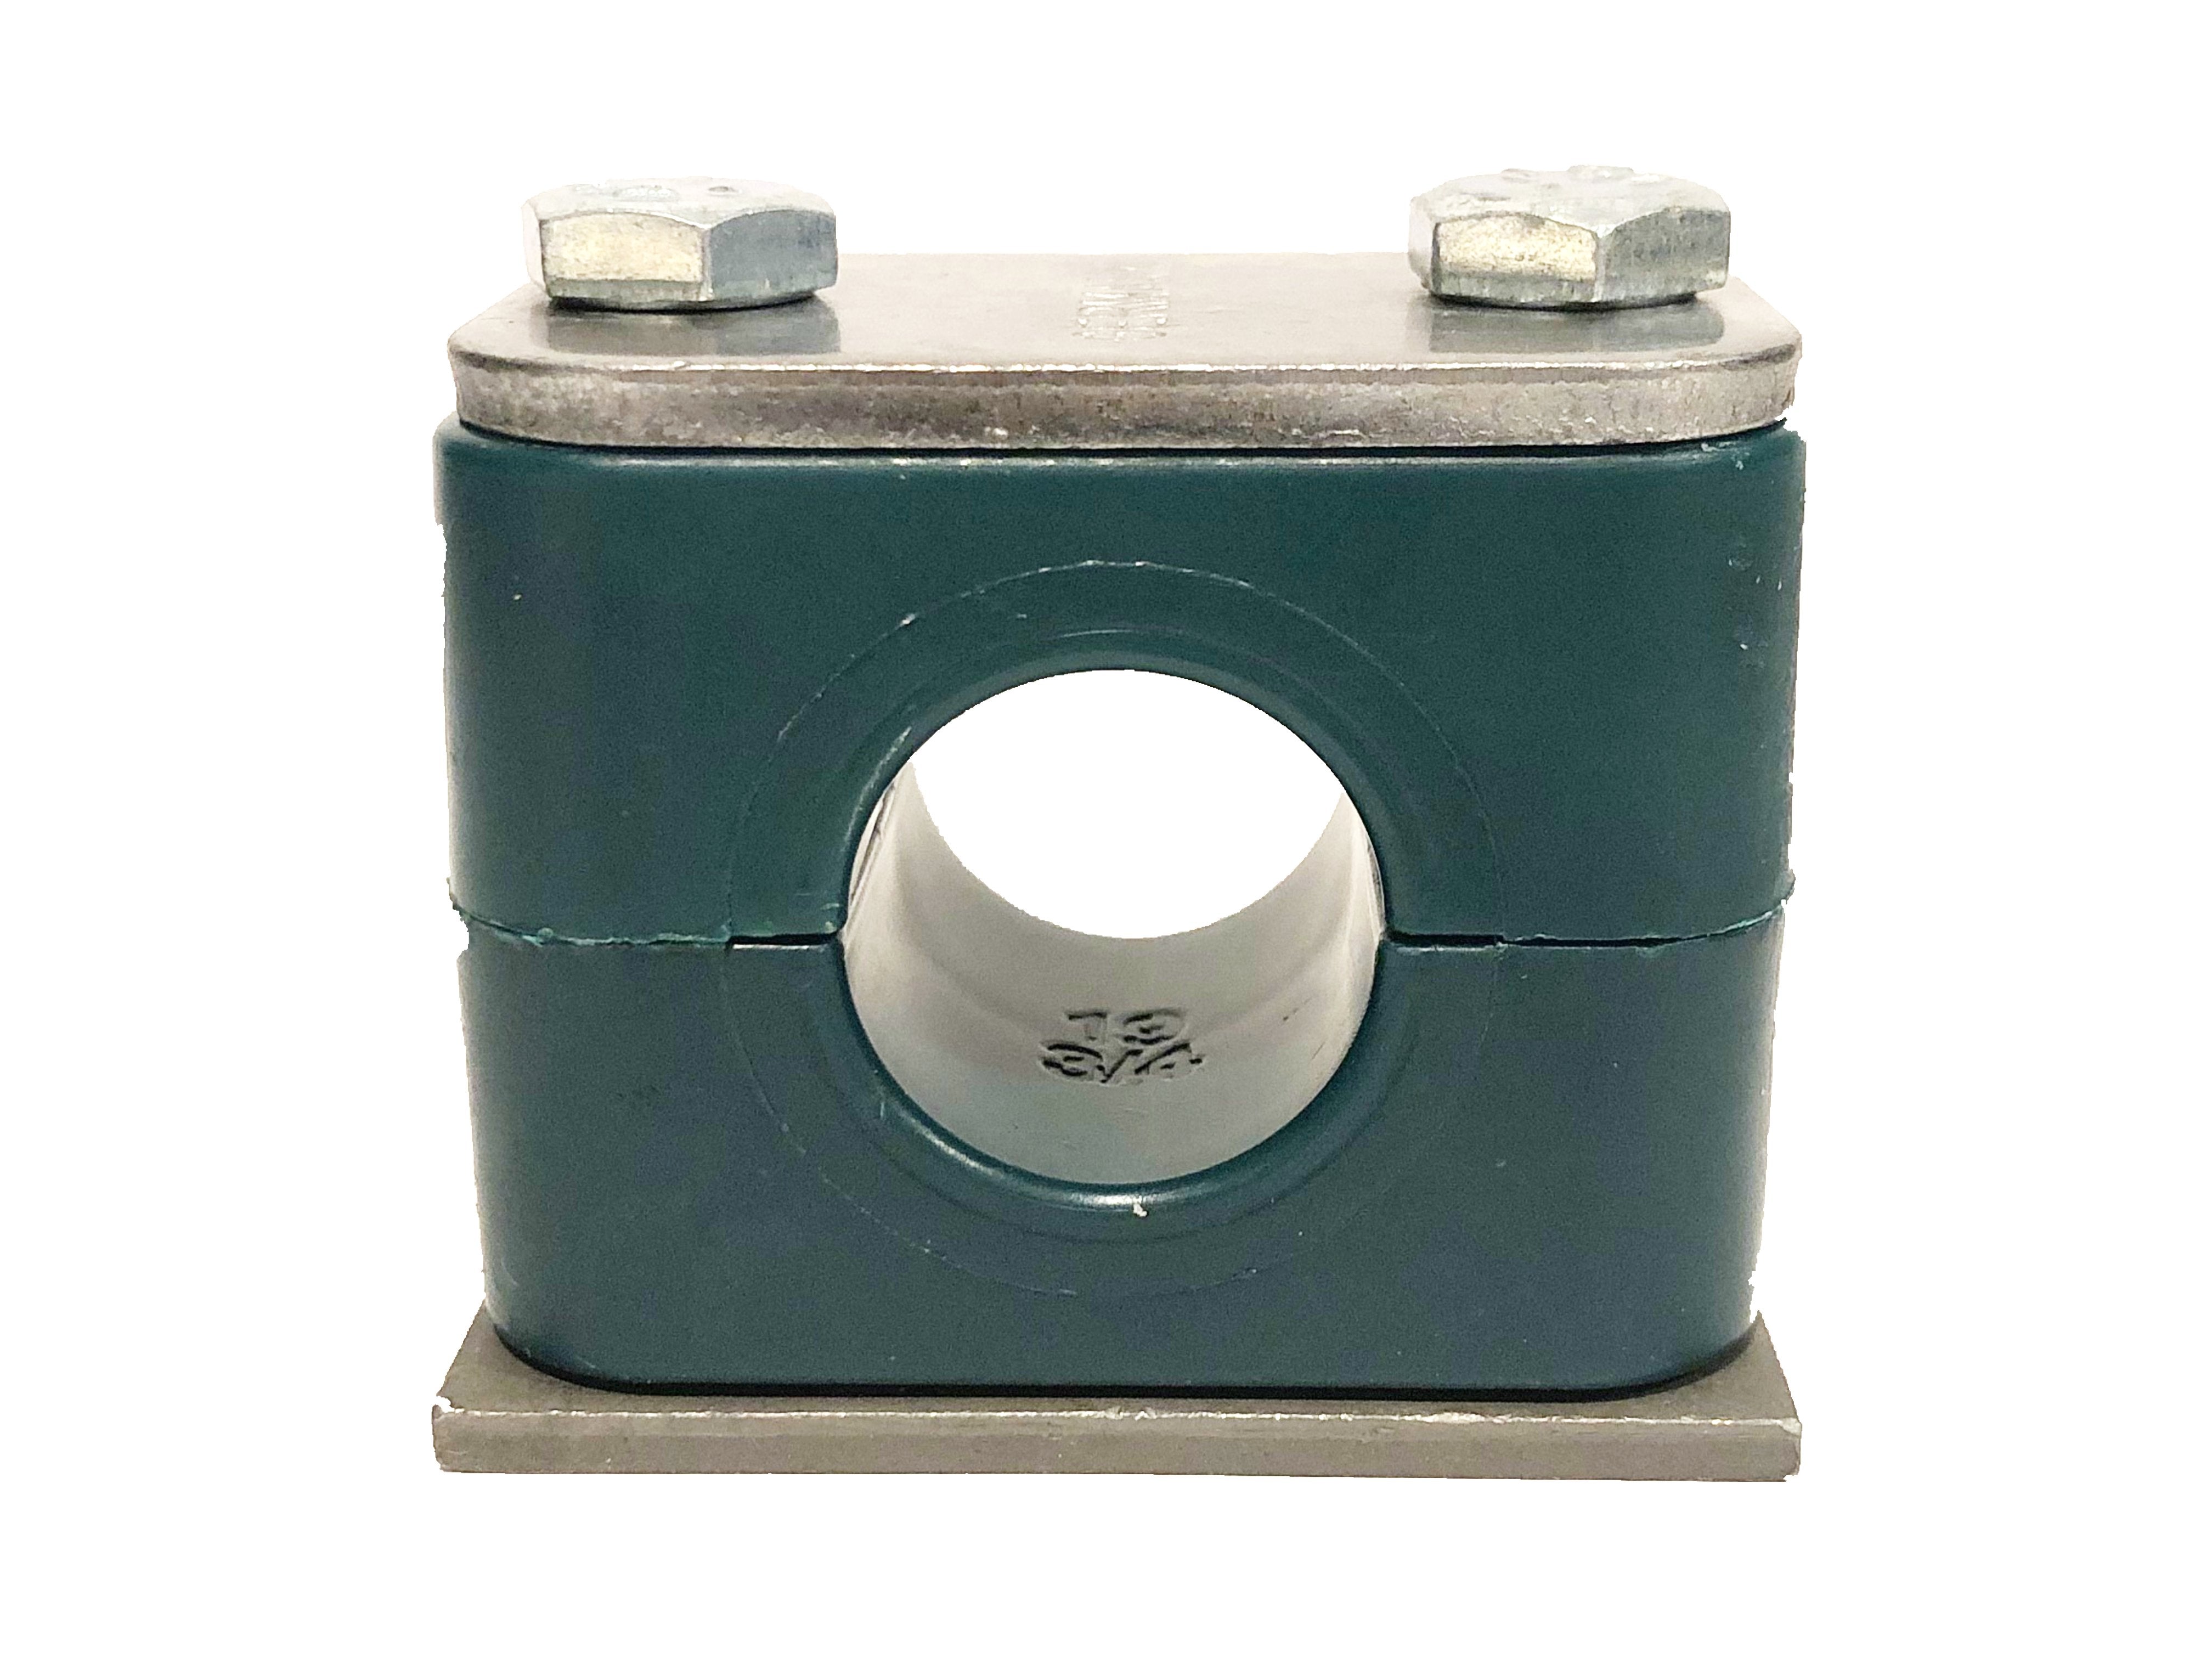 SP-217.2-PP-H-DP-AS-U-W5 : Stauff Clamp, Single Weld Plate, 0.677" (17.2mm) OD, for 3/8" Pipe, Green PP Insert, Smooth Interior, 316SS